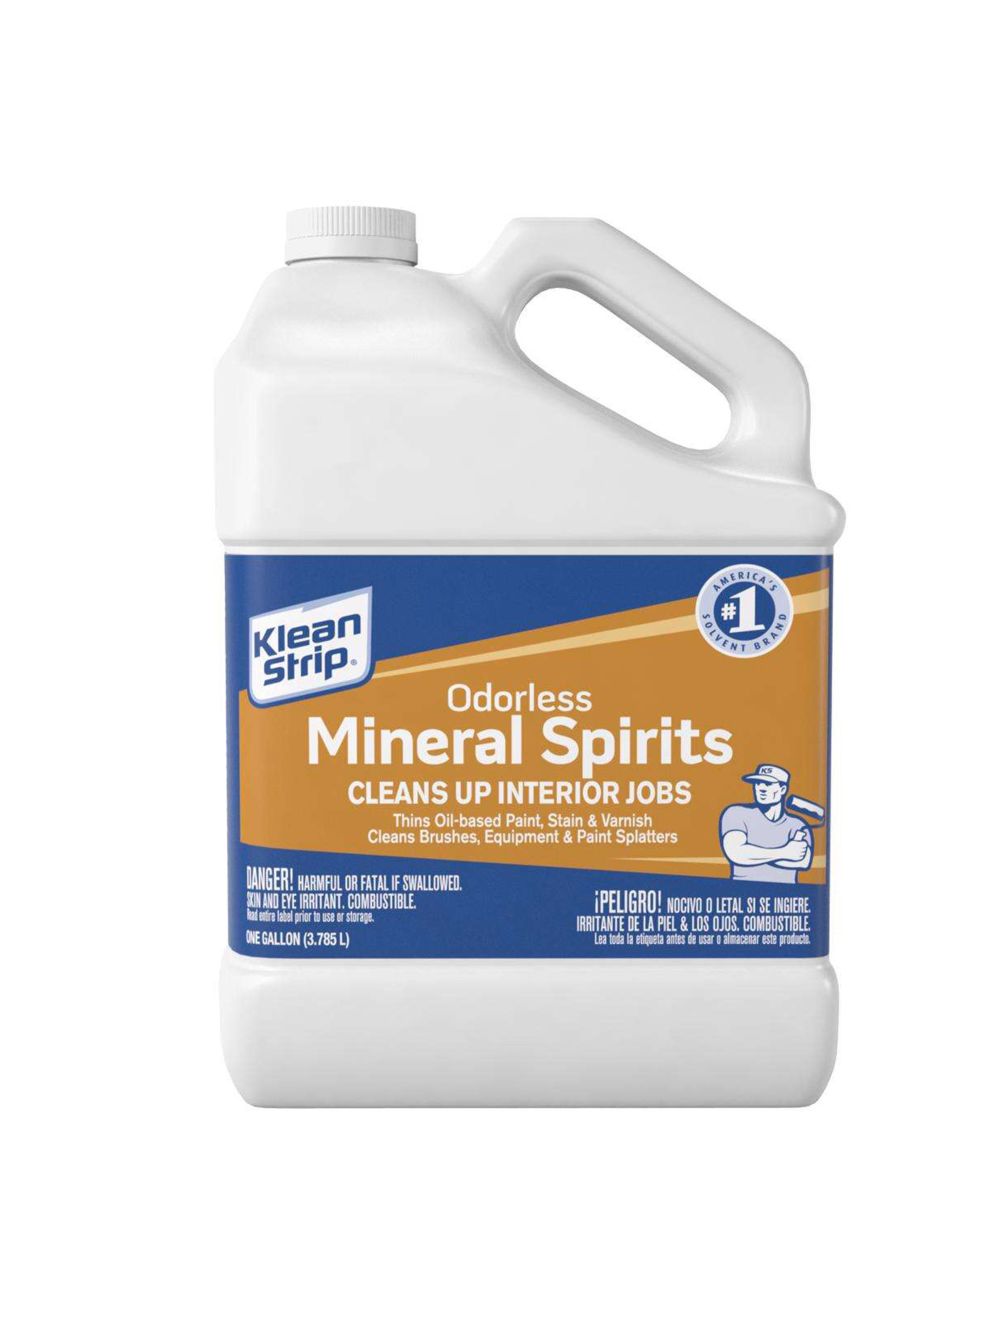 How to Handle and Store Mineral Spirits